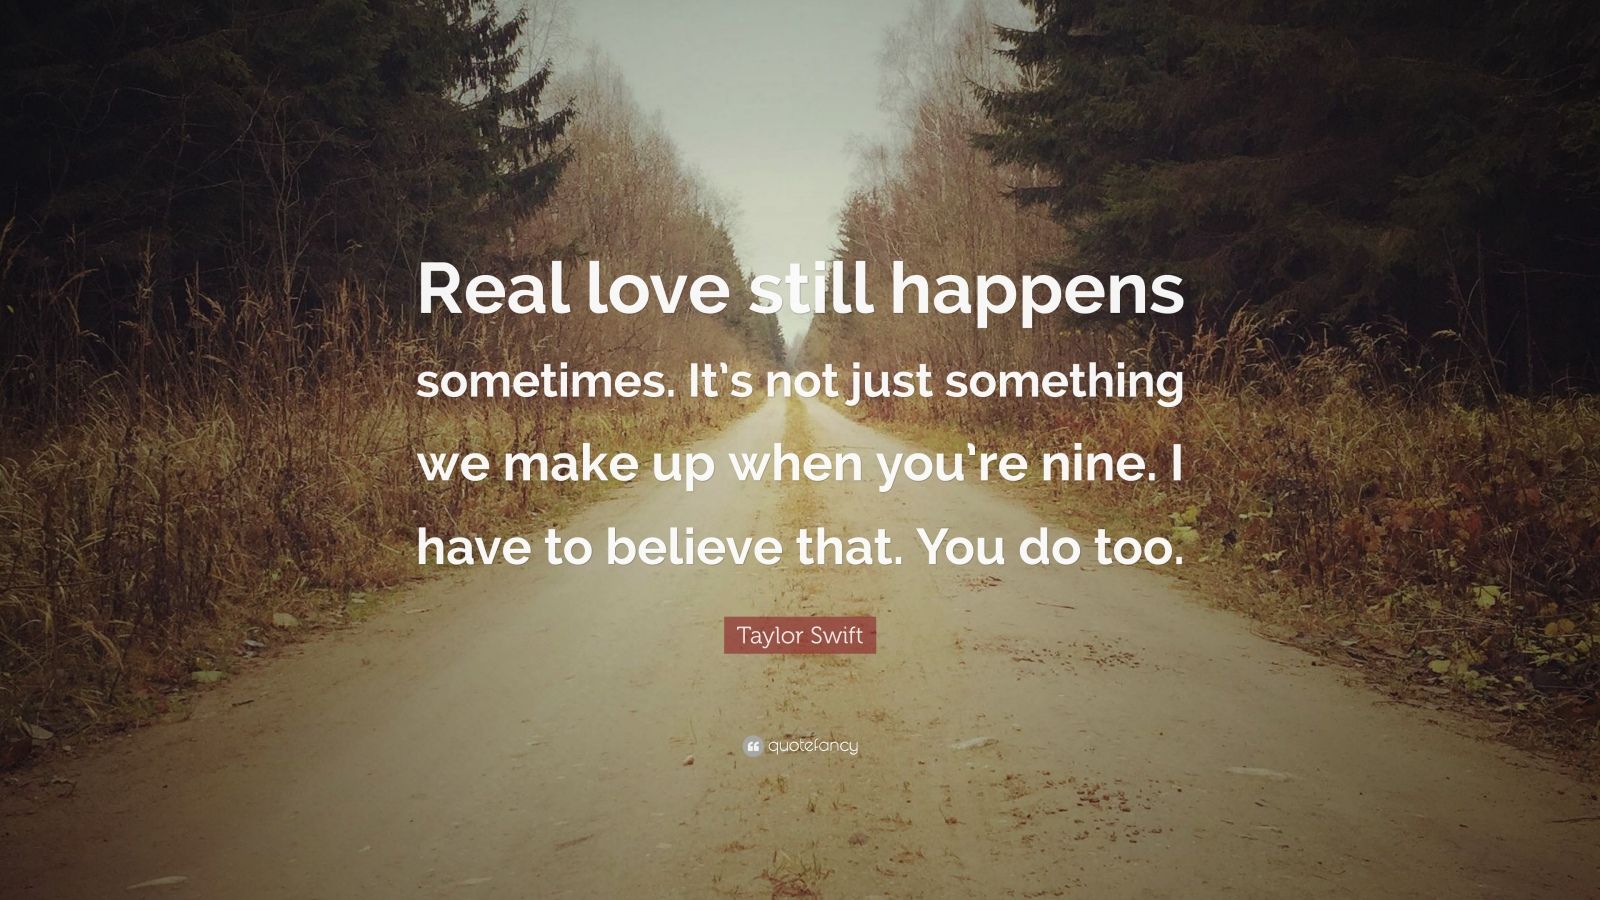 Taylor Swift Quote “Real love still happens sometimes It s not just something we